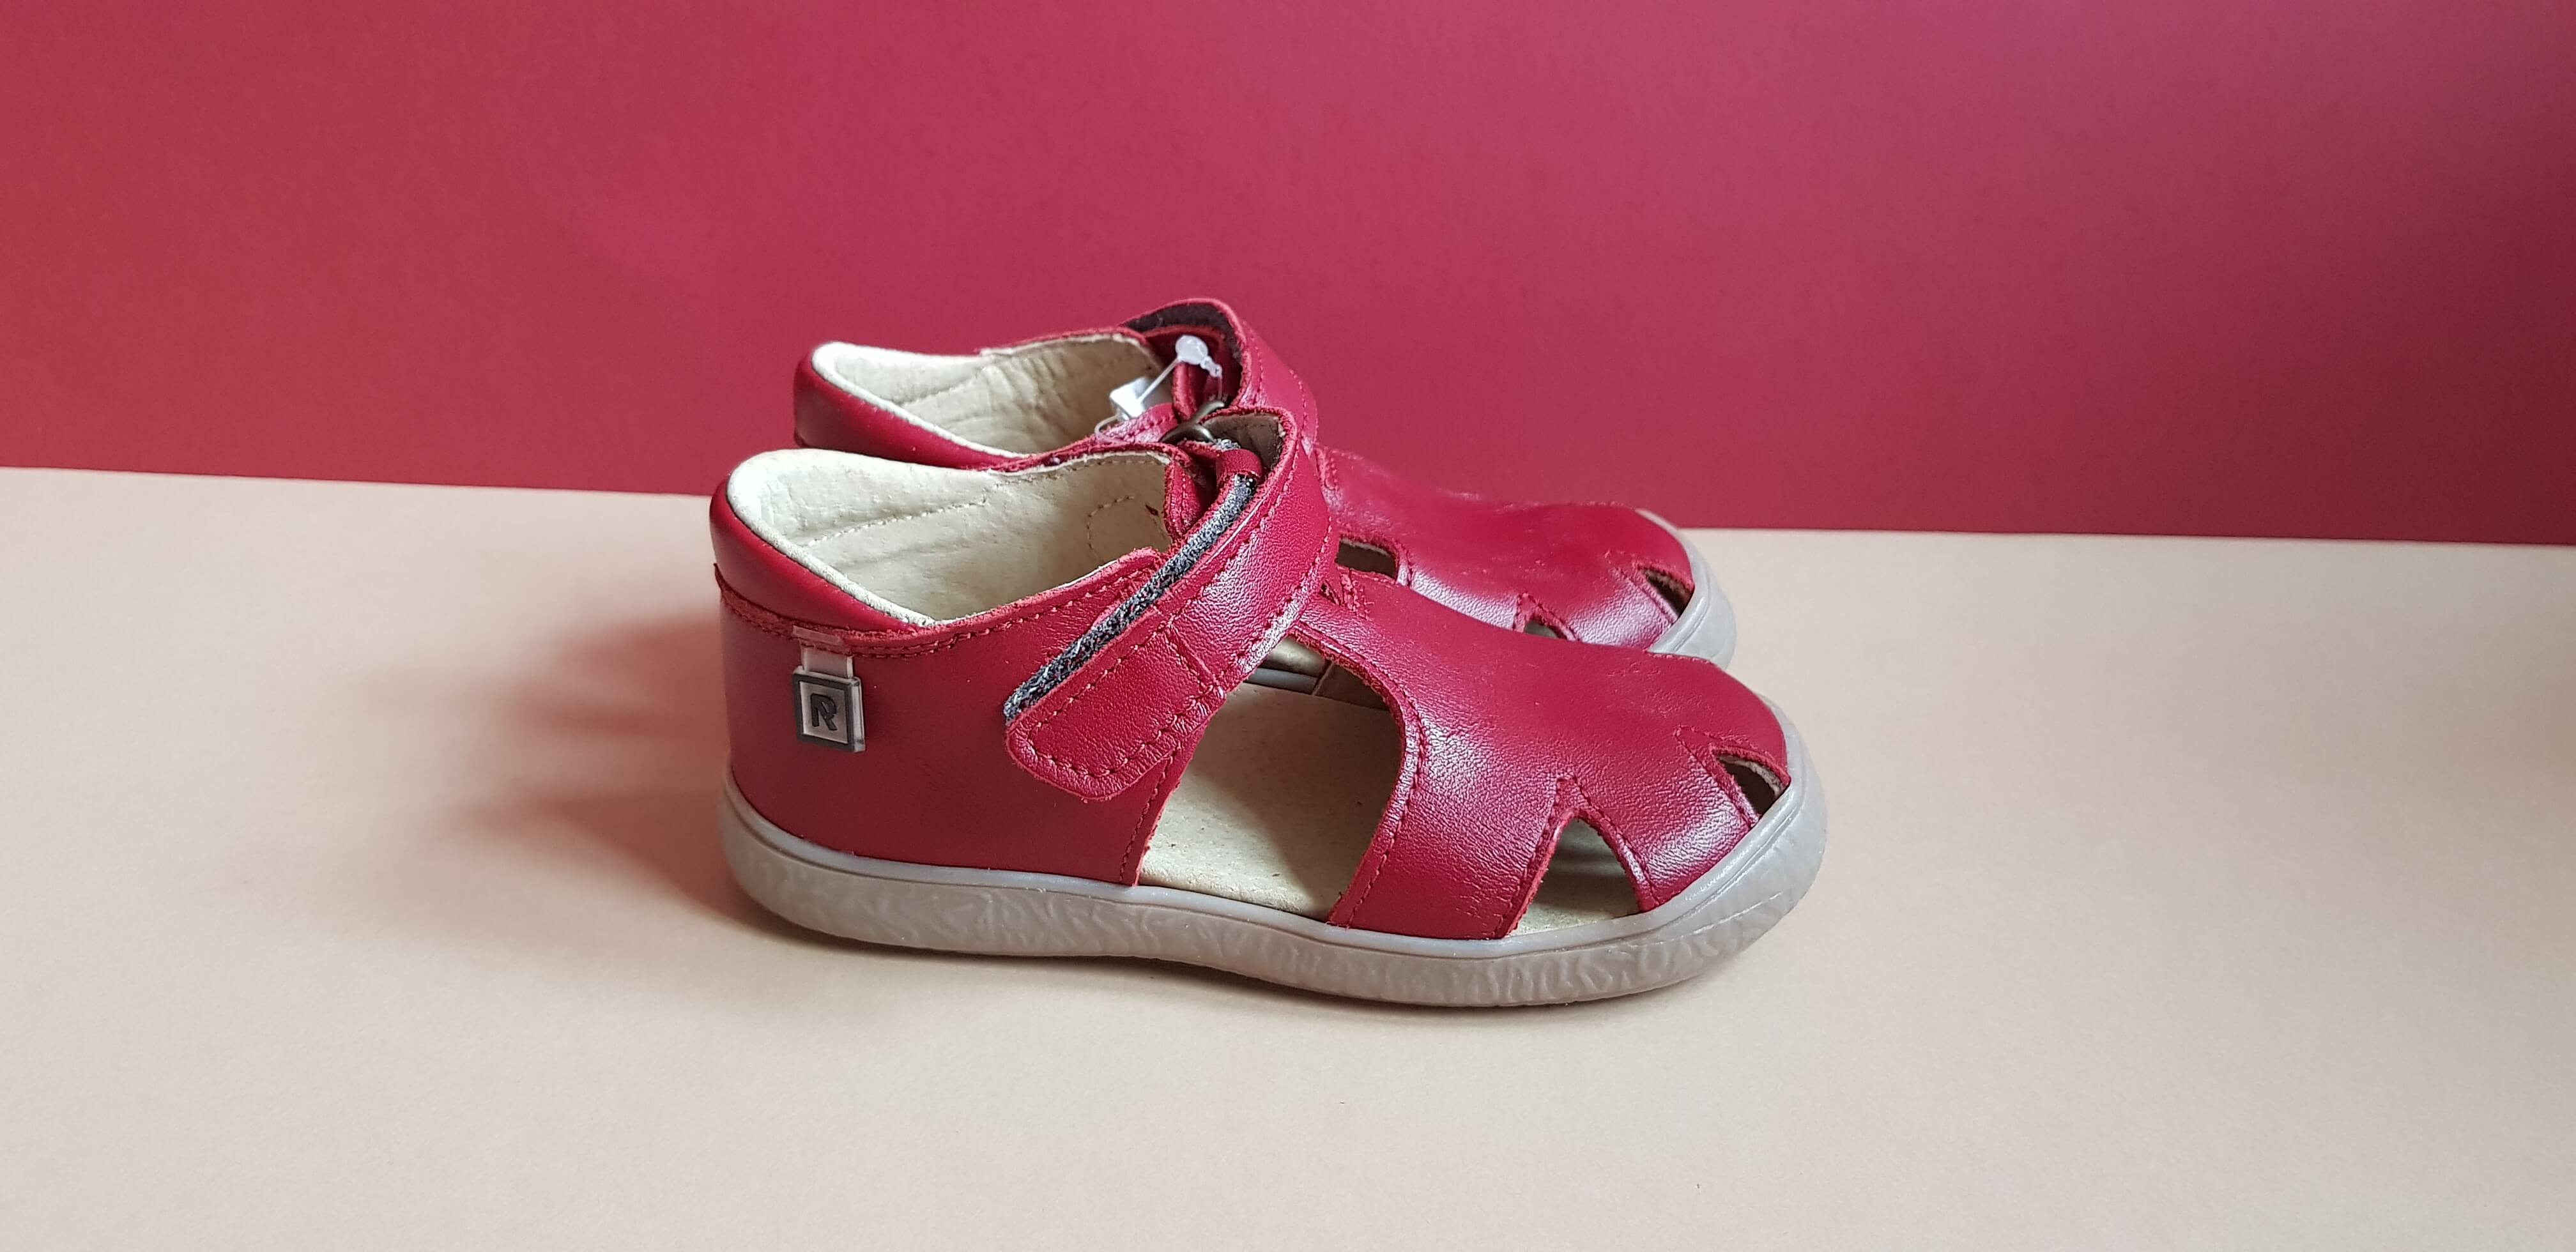 Burgundy Handmade high-quality soft leather kids sandals with brown sole, hook-and-loop fasteners and round toe box